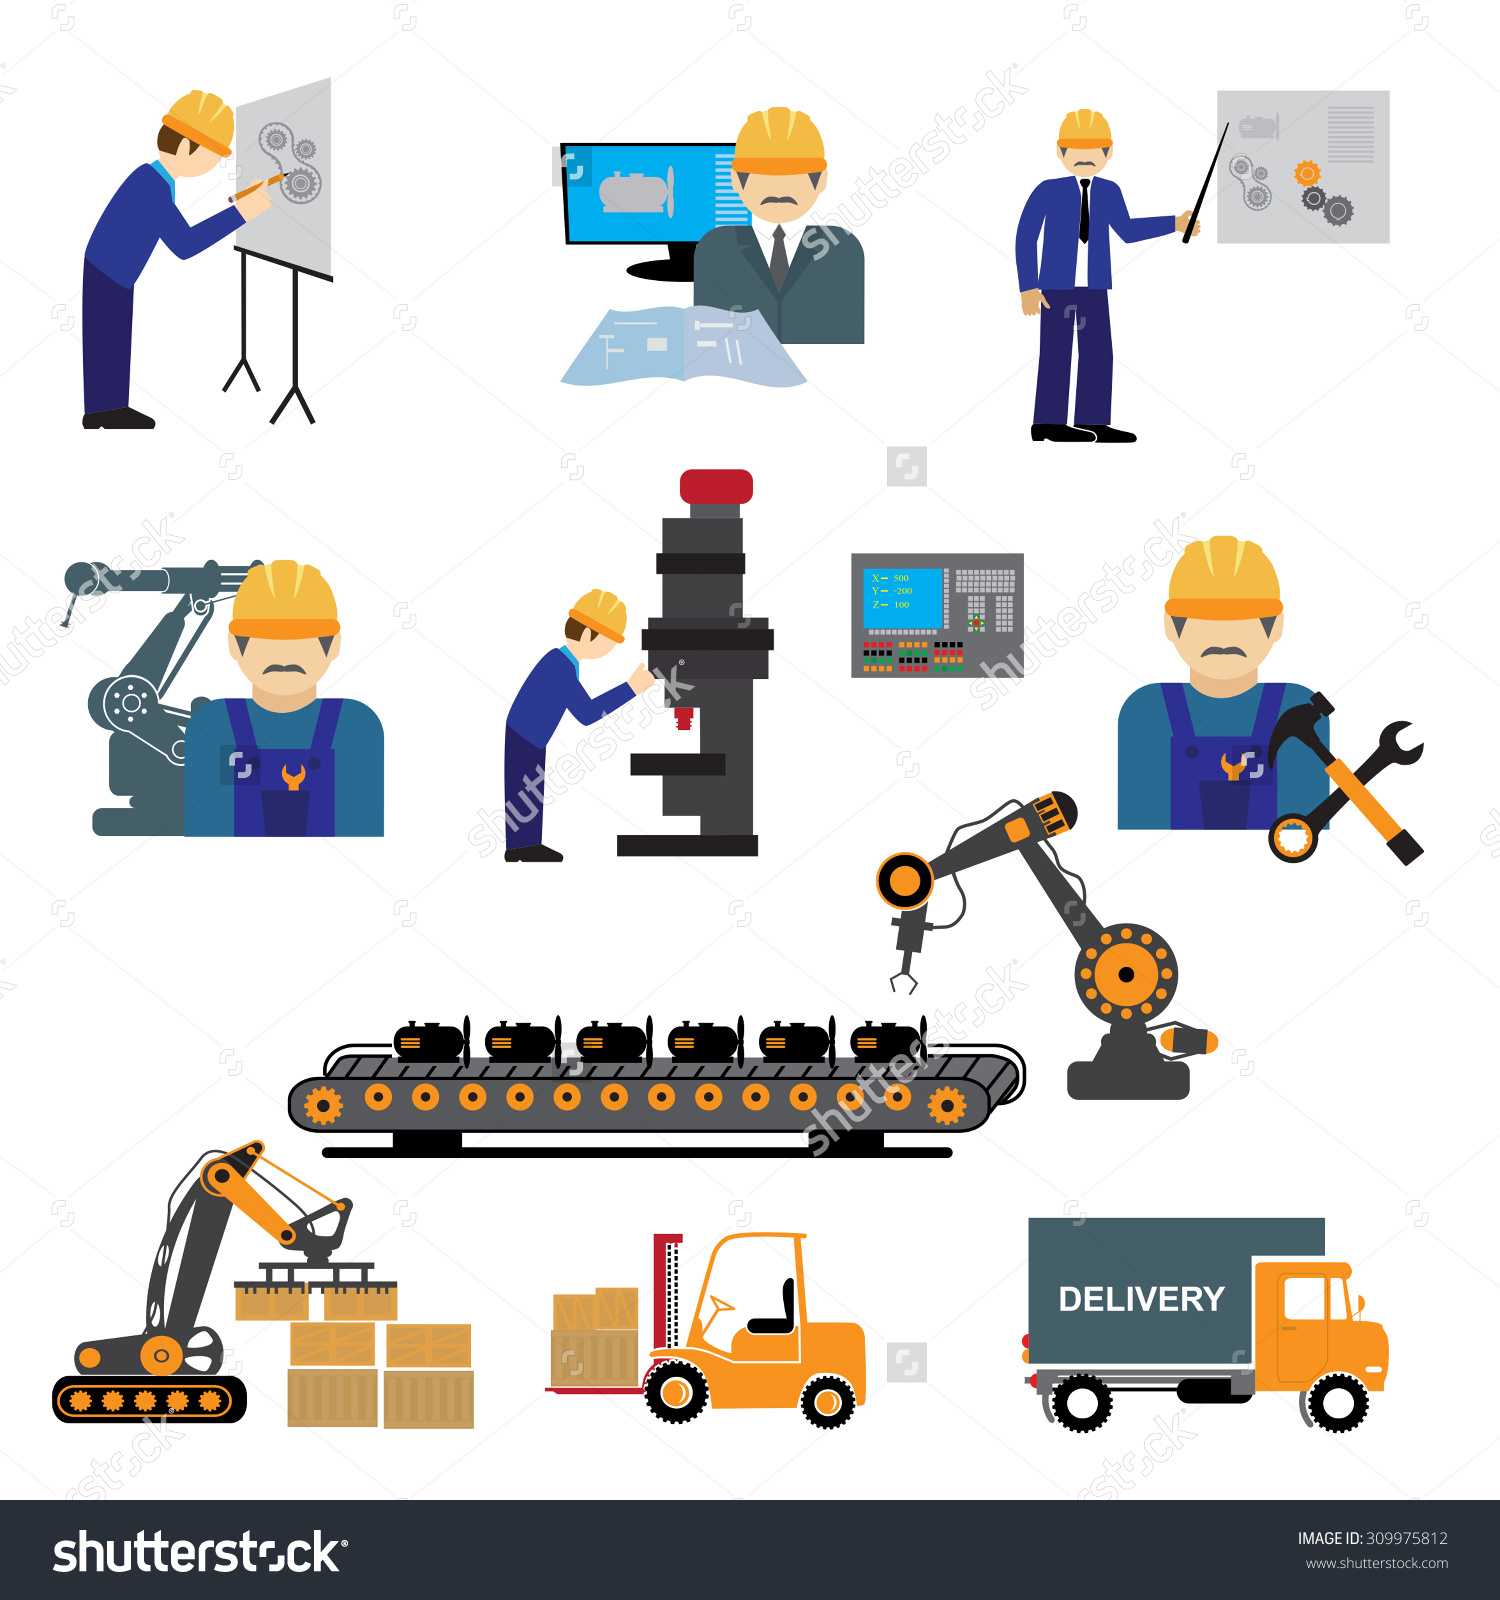 Manufacturing process clipart.